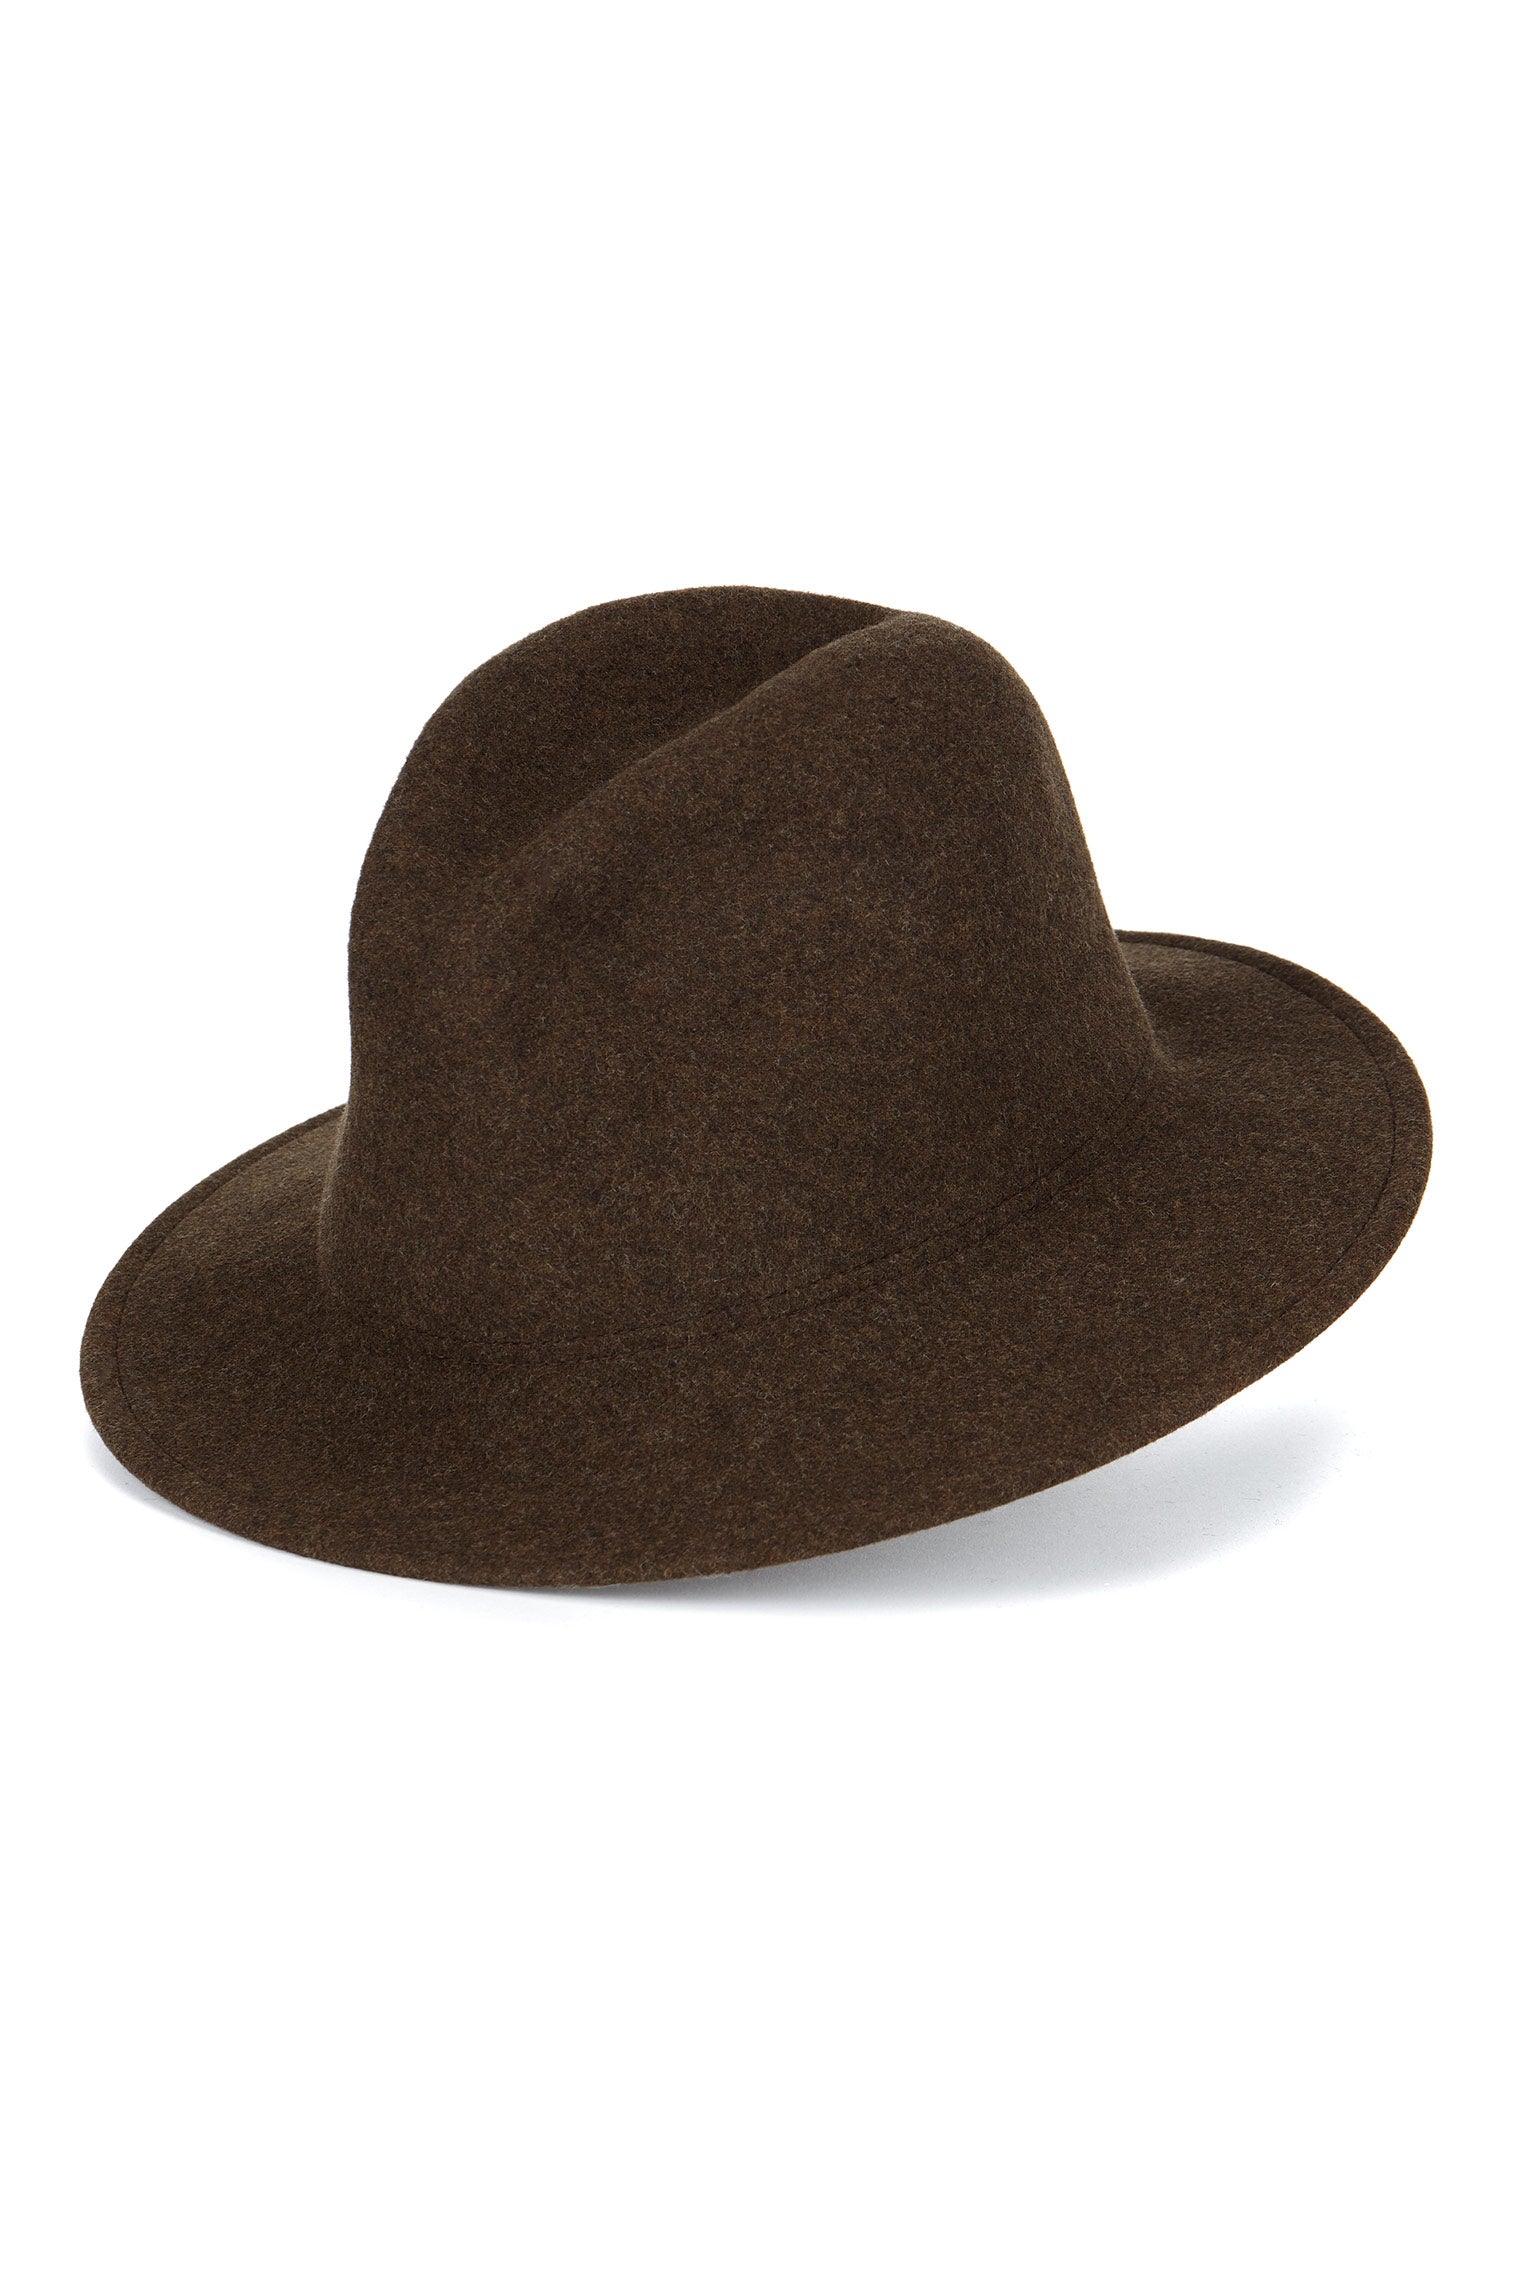 Rambler Rollable Trilby - Packable & Rollable Hats - Lock & Co. Hatters London UK